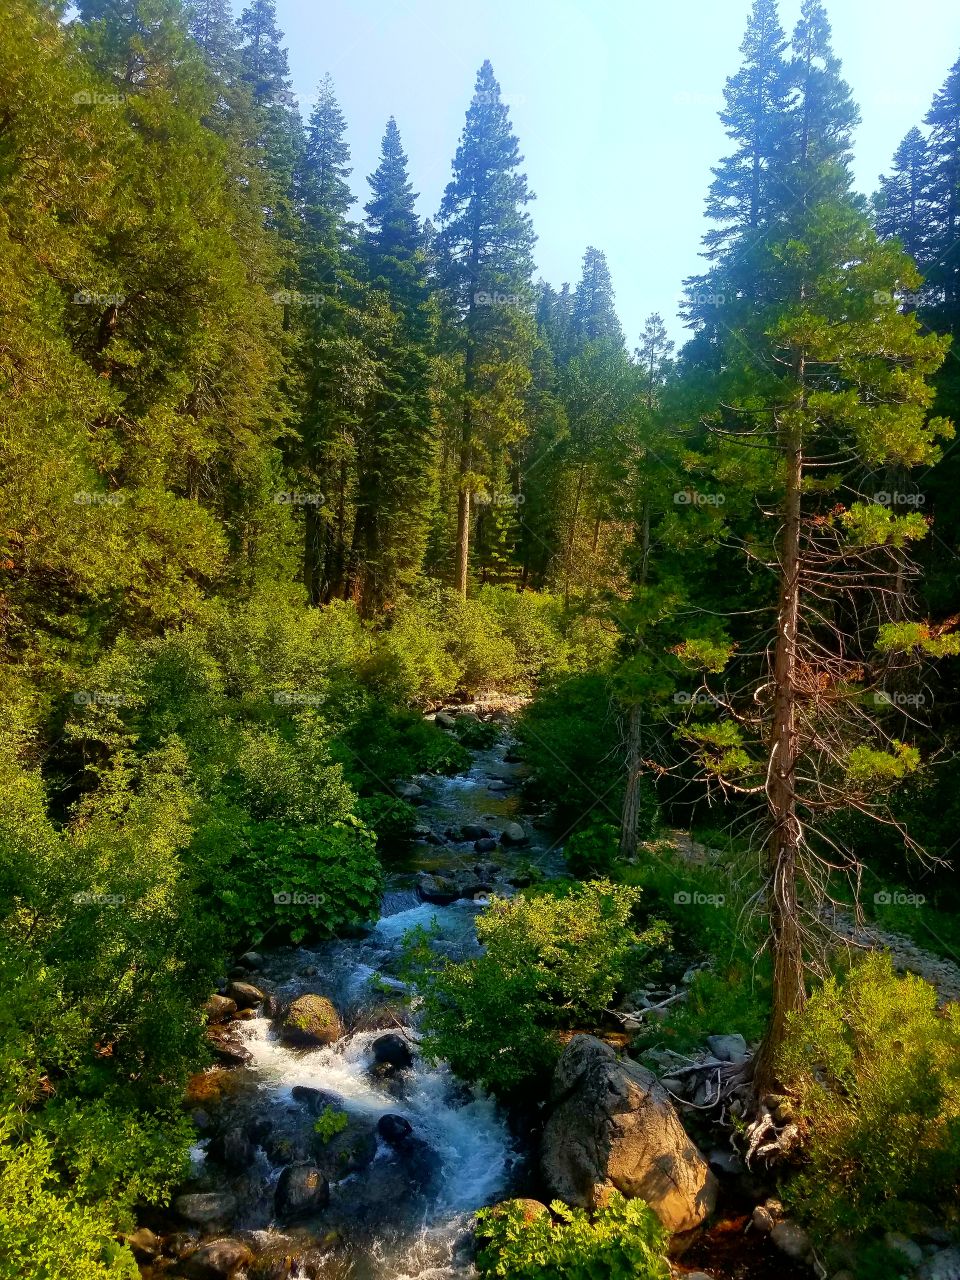 West branch of the feather river